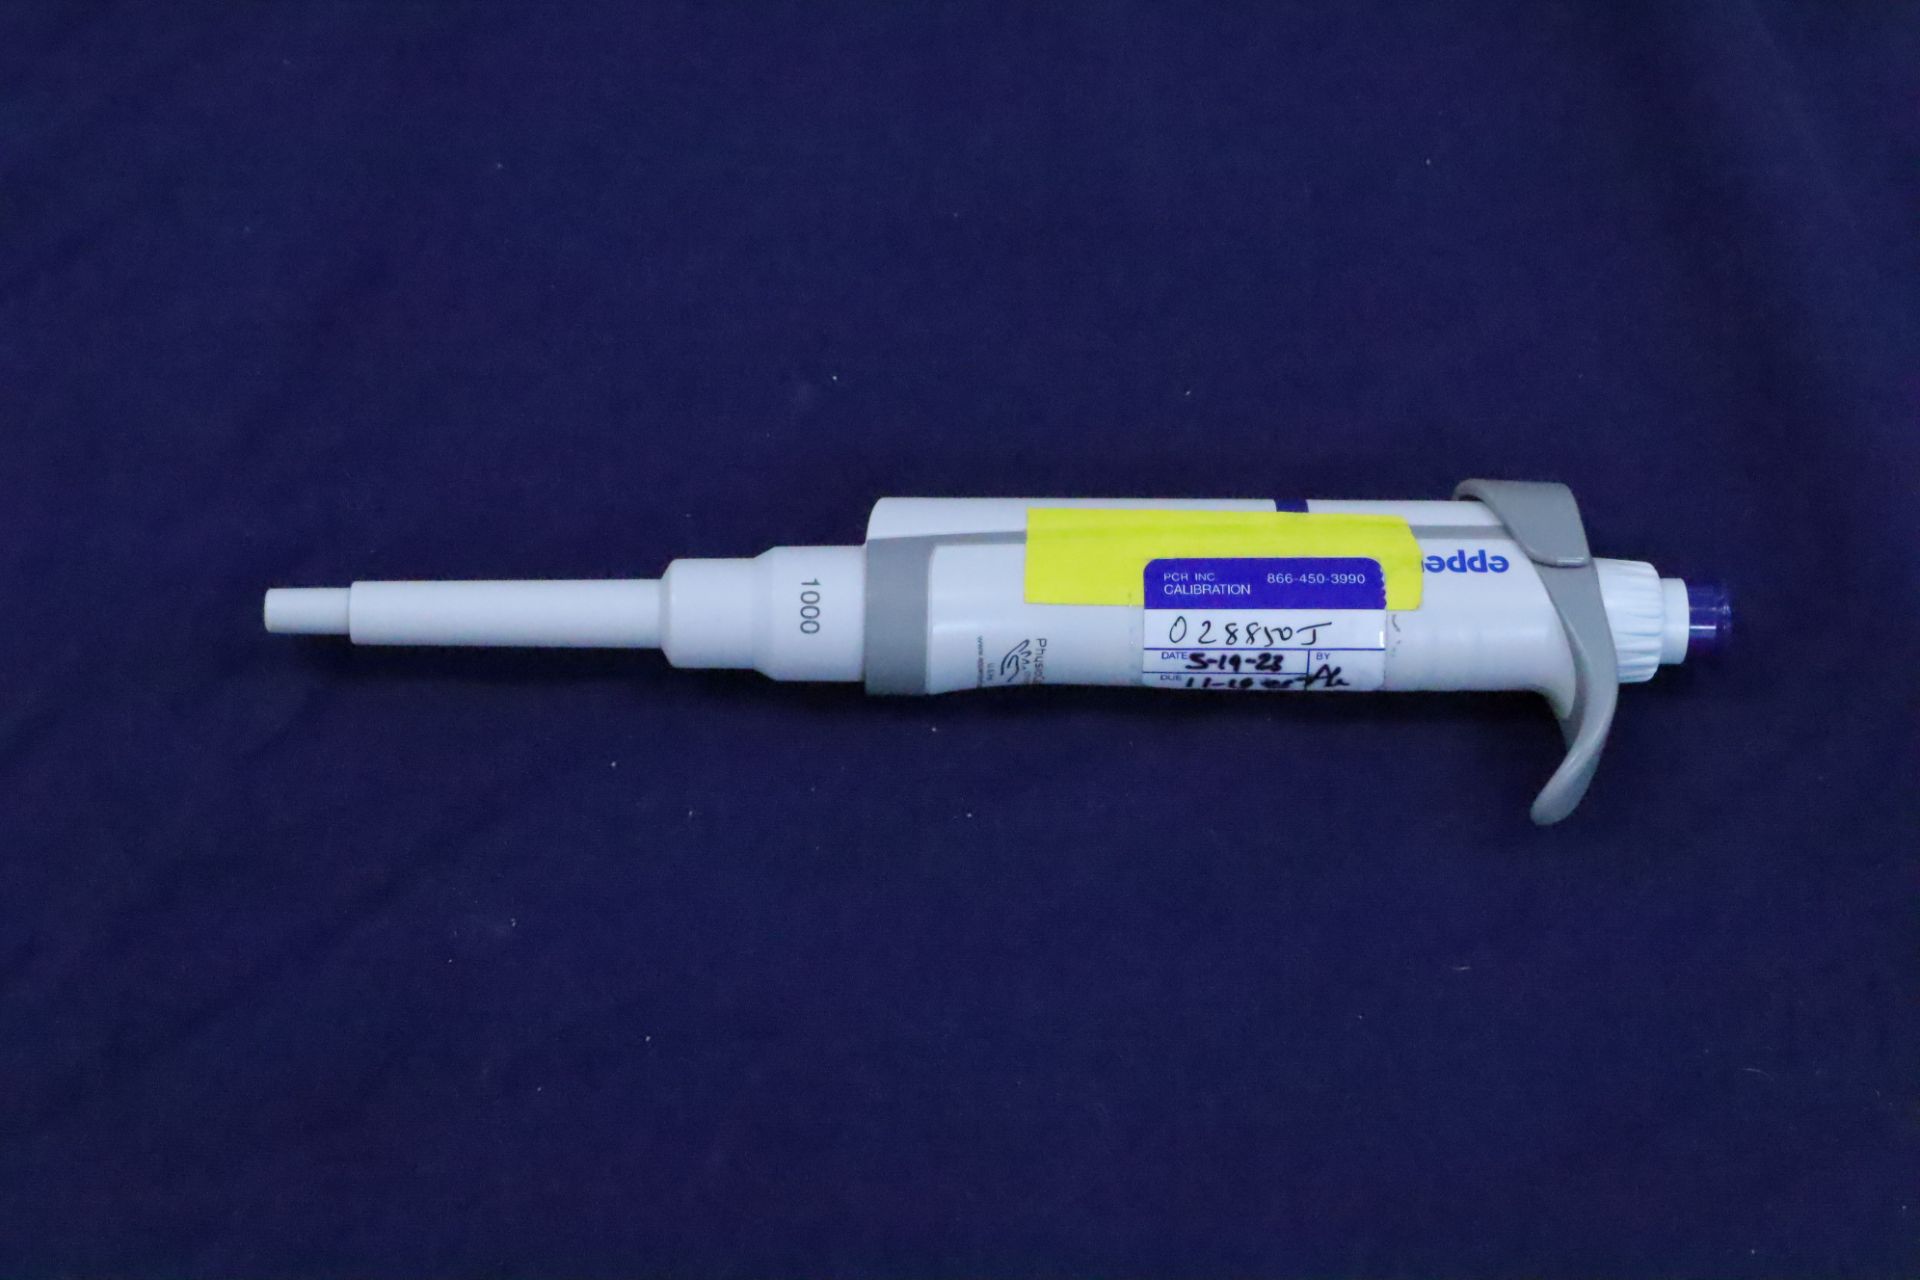 Eppendorf Research Plus Adjustable Volume Pipette 100-1000 uL - Image 2 of 4